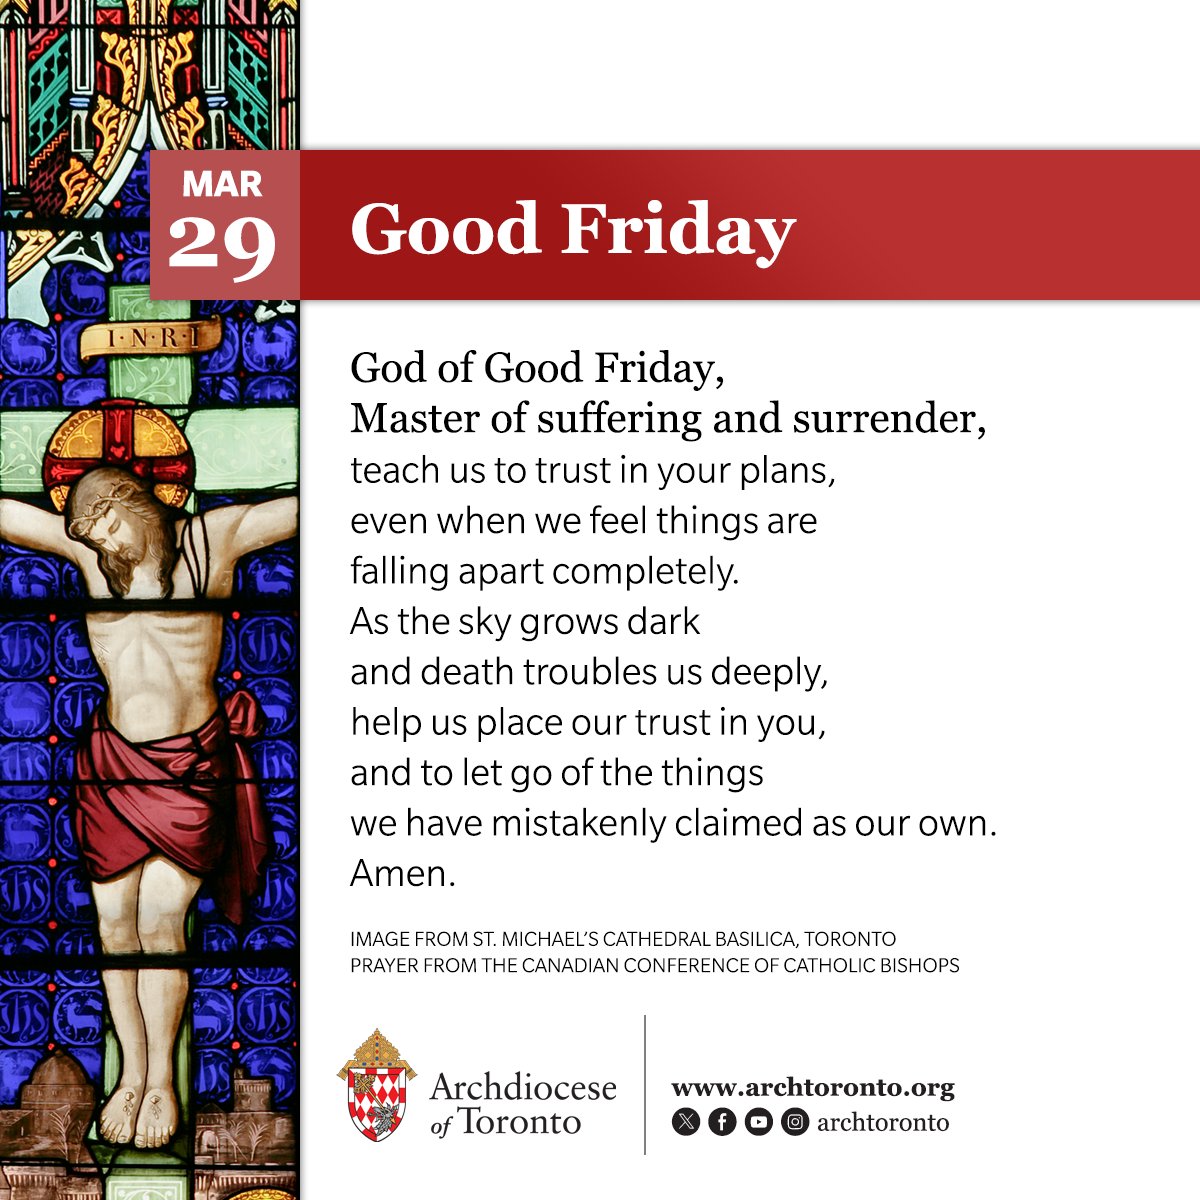 God of Good Friday, Master of suffering and surrender, teach us to trust in your plans. As the sky grows dark and death troubles us deeply, help us place our trust in you, and to let go of the things we have mistakenly claimed as our own. Amen. @CCCB_CECC #catholicTO